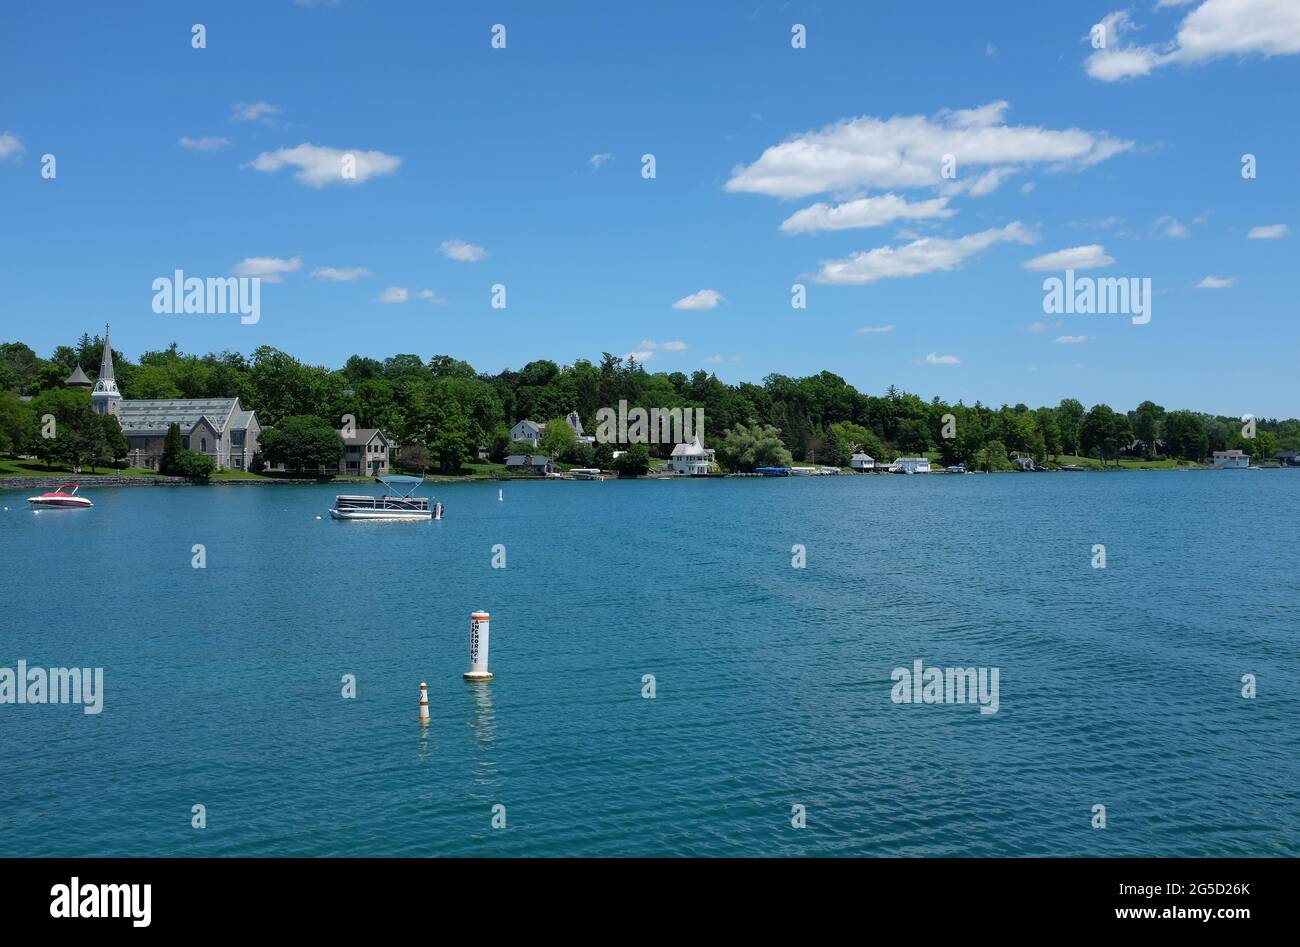 SKANEATELES, NEW YORK - 17 JUNE 2021: St. James Episcopal Church and homes on Skaneateles Lake in upstate New York. Stock Photo